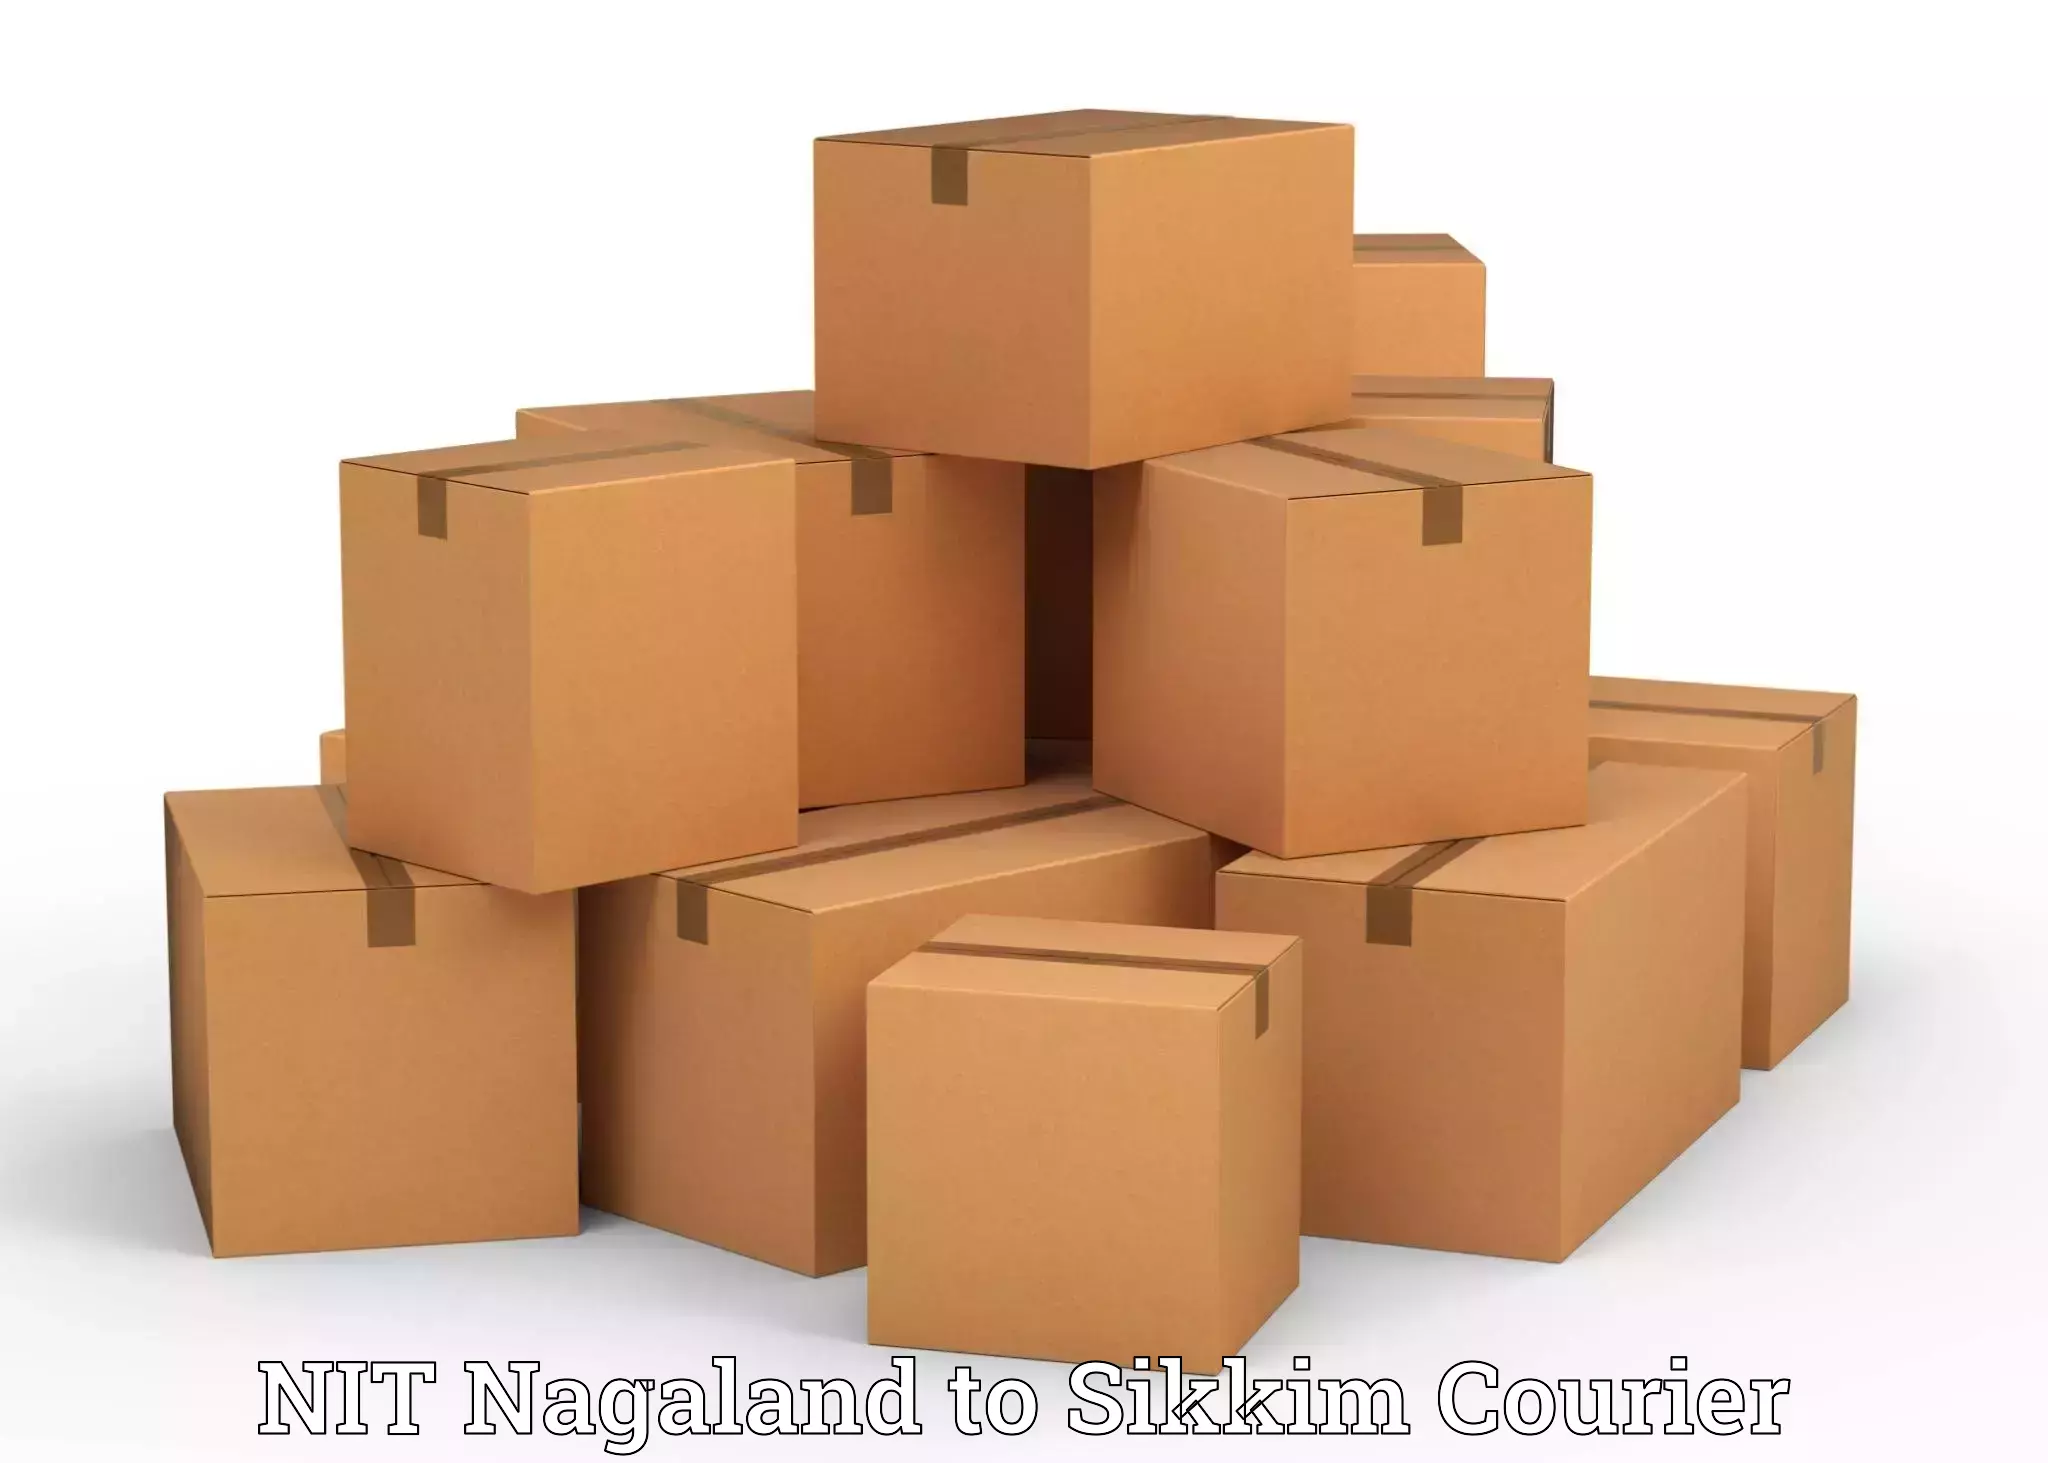 Furniture transport company NIT Nagaland to East Sikkim